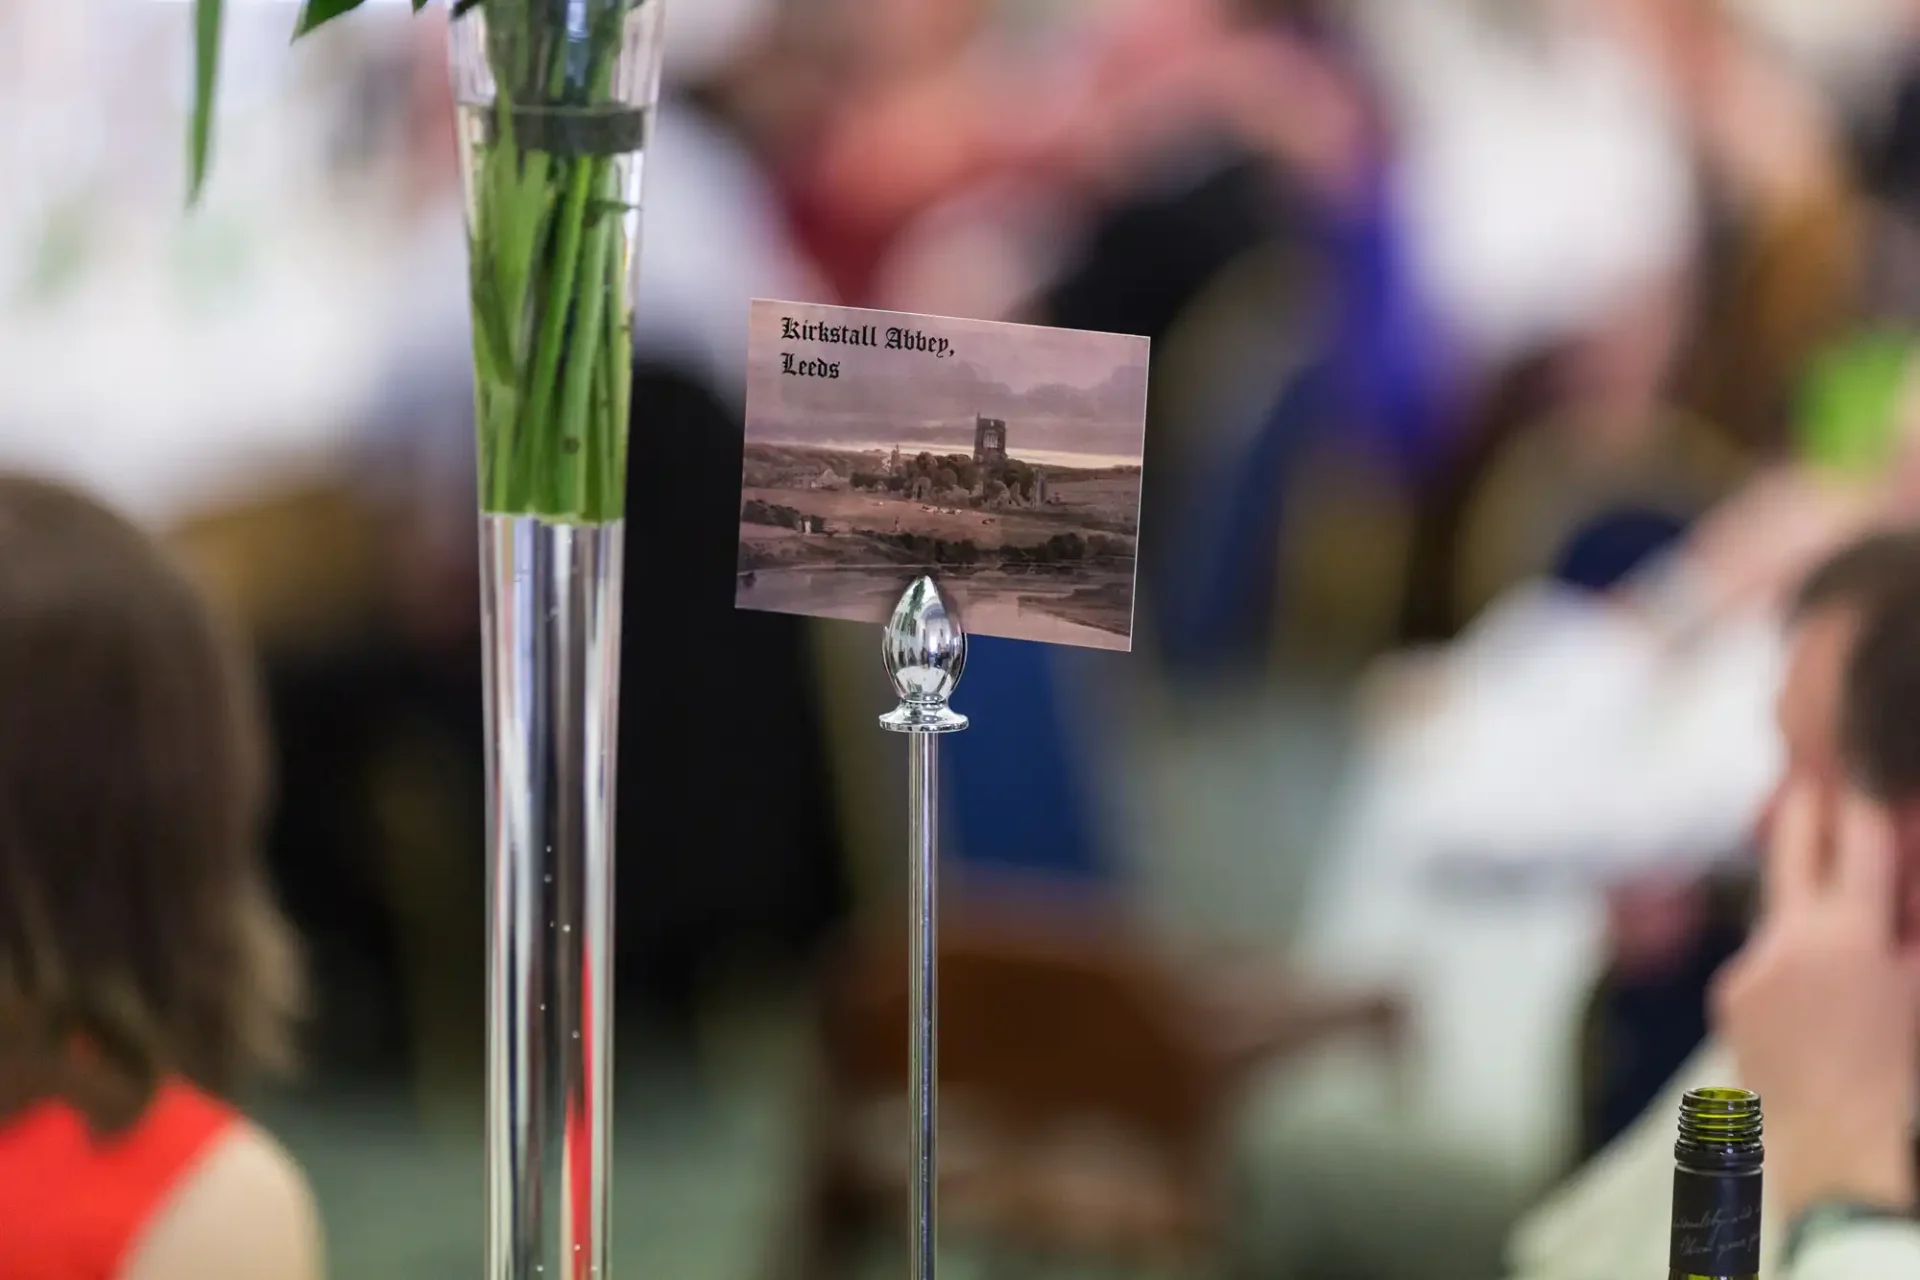 Postcard of birshtall abbey, kent, attached to a flower vase, in focus against a blurred background of people at an event.